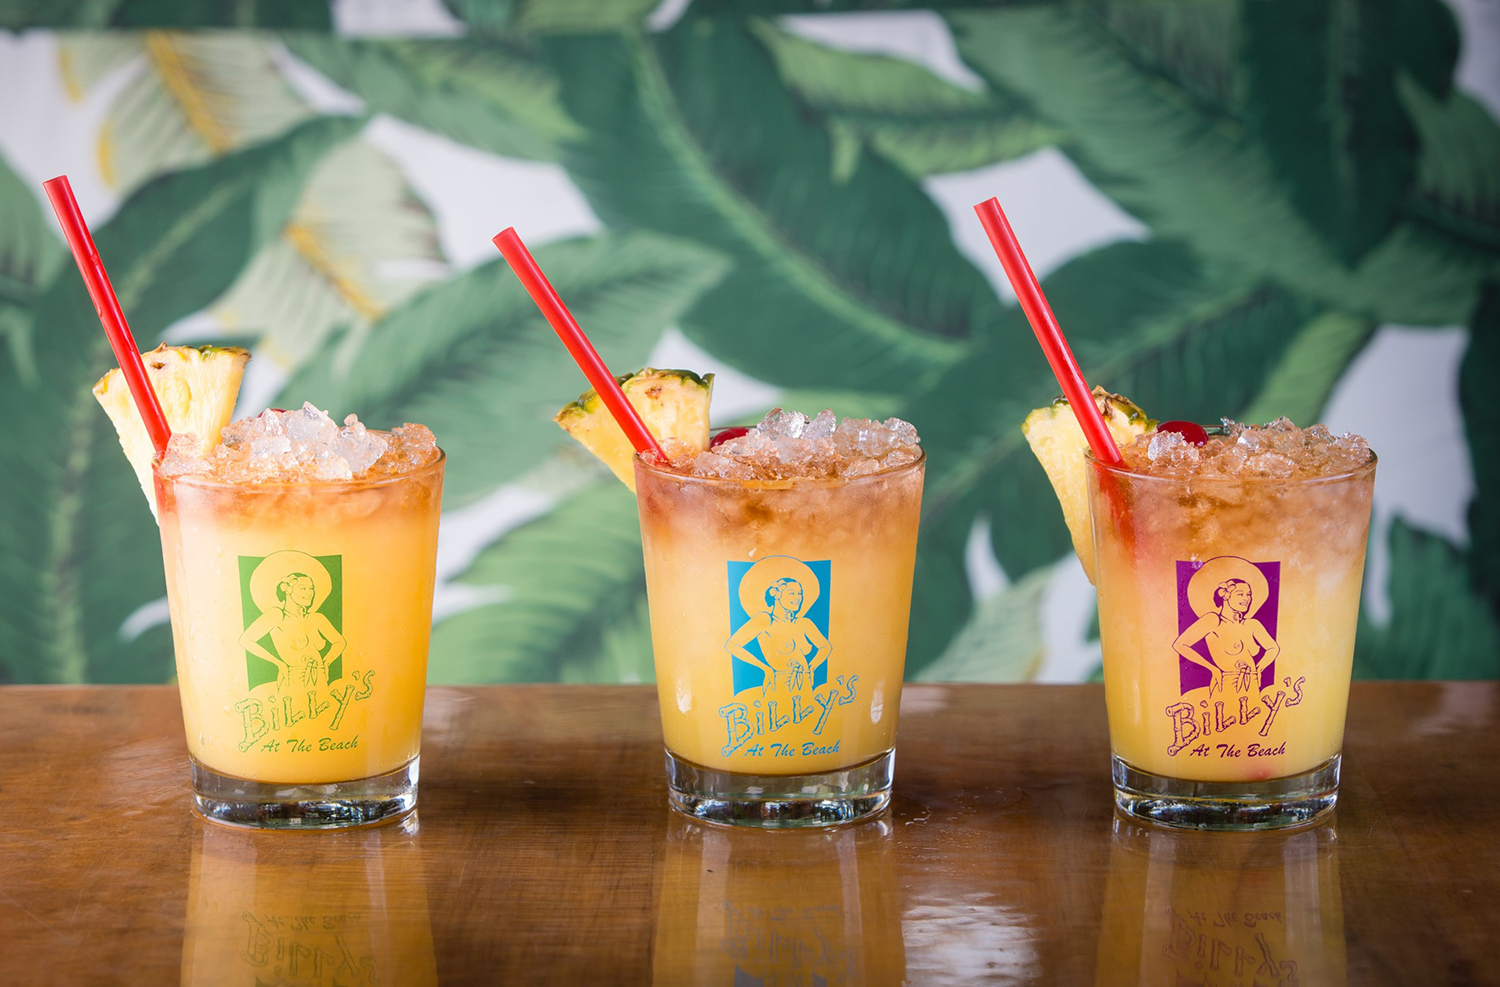 Celebrate National Mai Tai Day Aug. 30 at Billy’s at the Beach